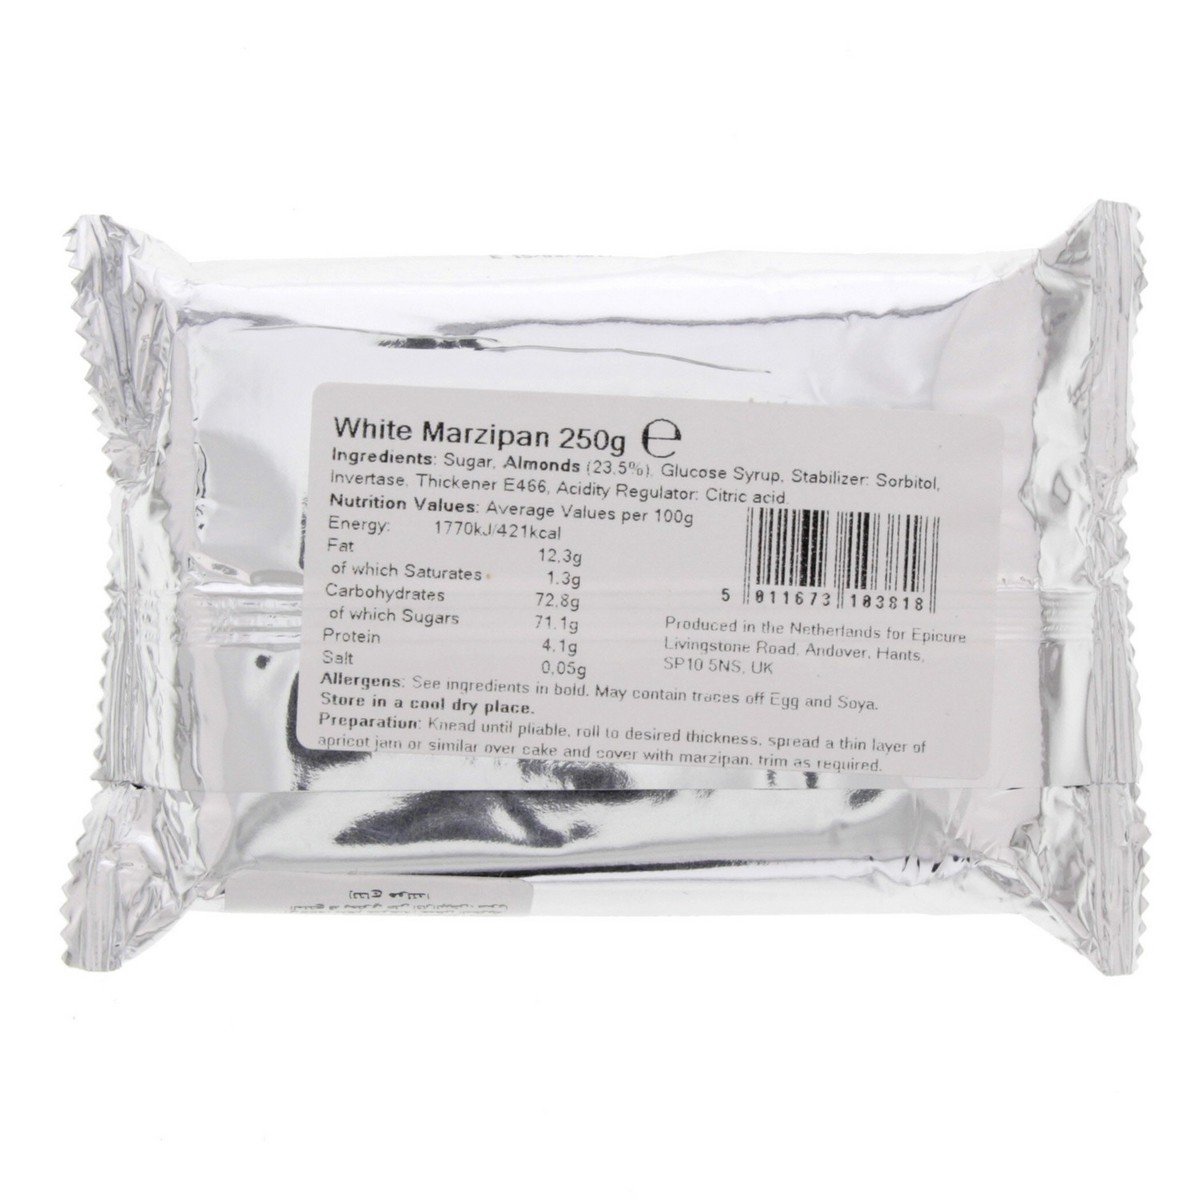 Epicure White Marzipan 250 g